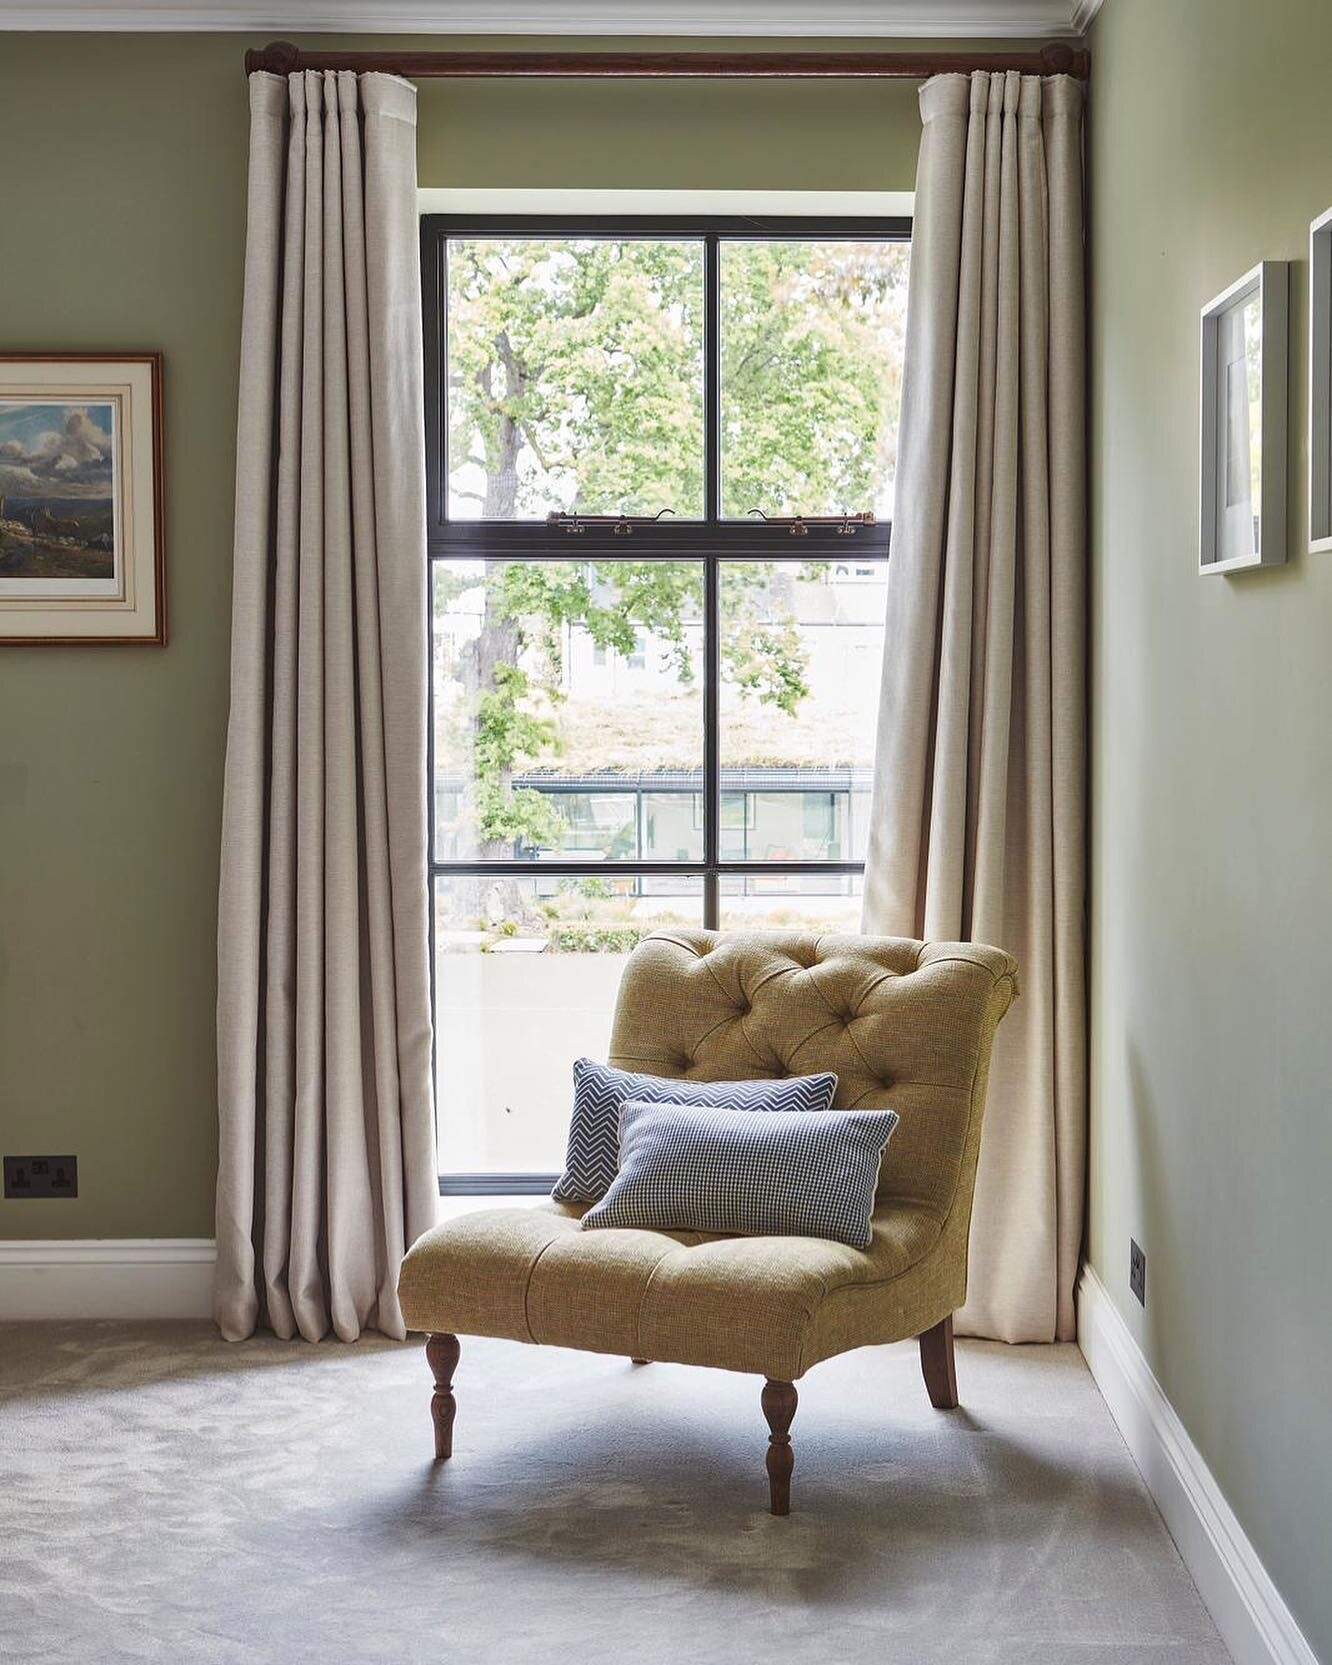 Refresh the mind with a space to chill and find calm.

Interior design: @colour_interiors_ltd 
Chair fabric: @andrewmartin_int 
Chair: @sofadotcom 
Curtains: @bespokecurtainslondon 
Paint: @sanderson1860 
Architect: @jaamarchitects 
Contractor: @masc